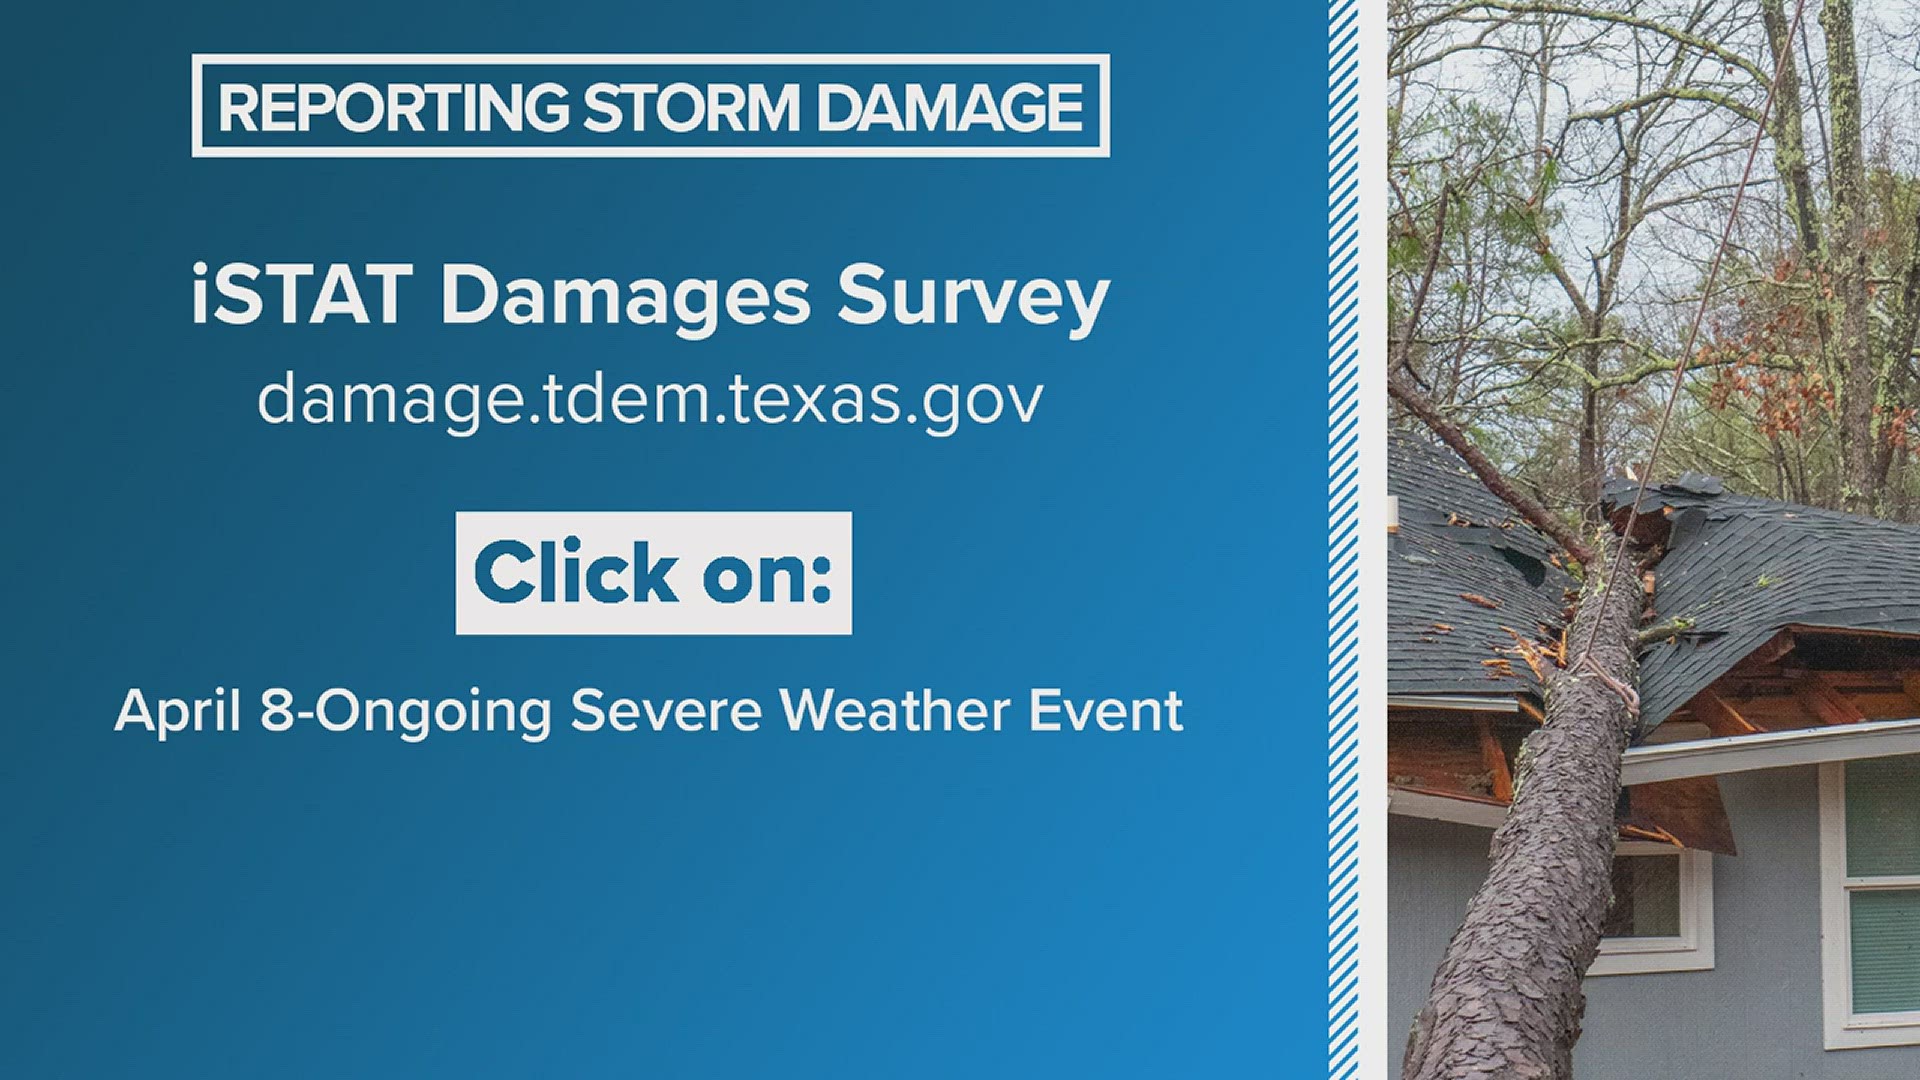 City and county governments need resident's help in assessing their damages.